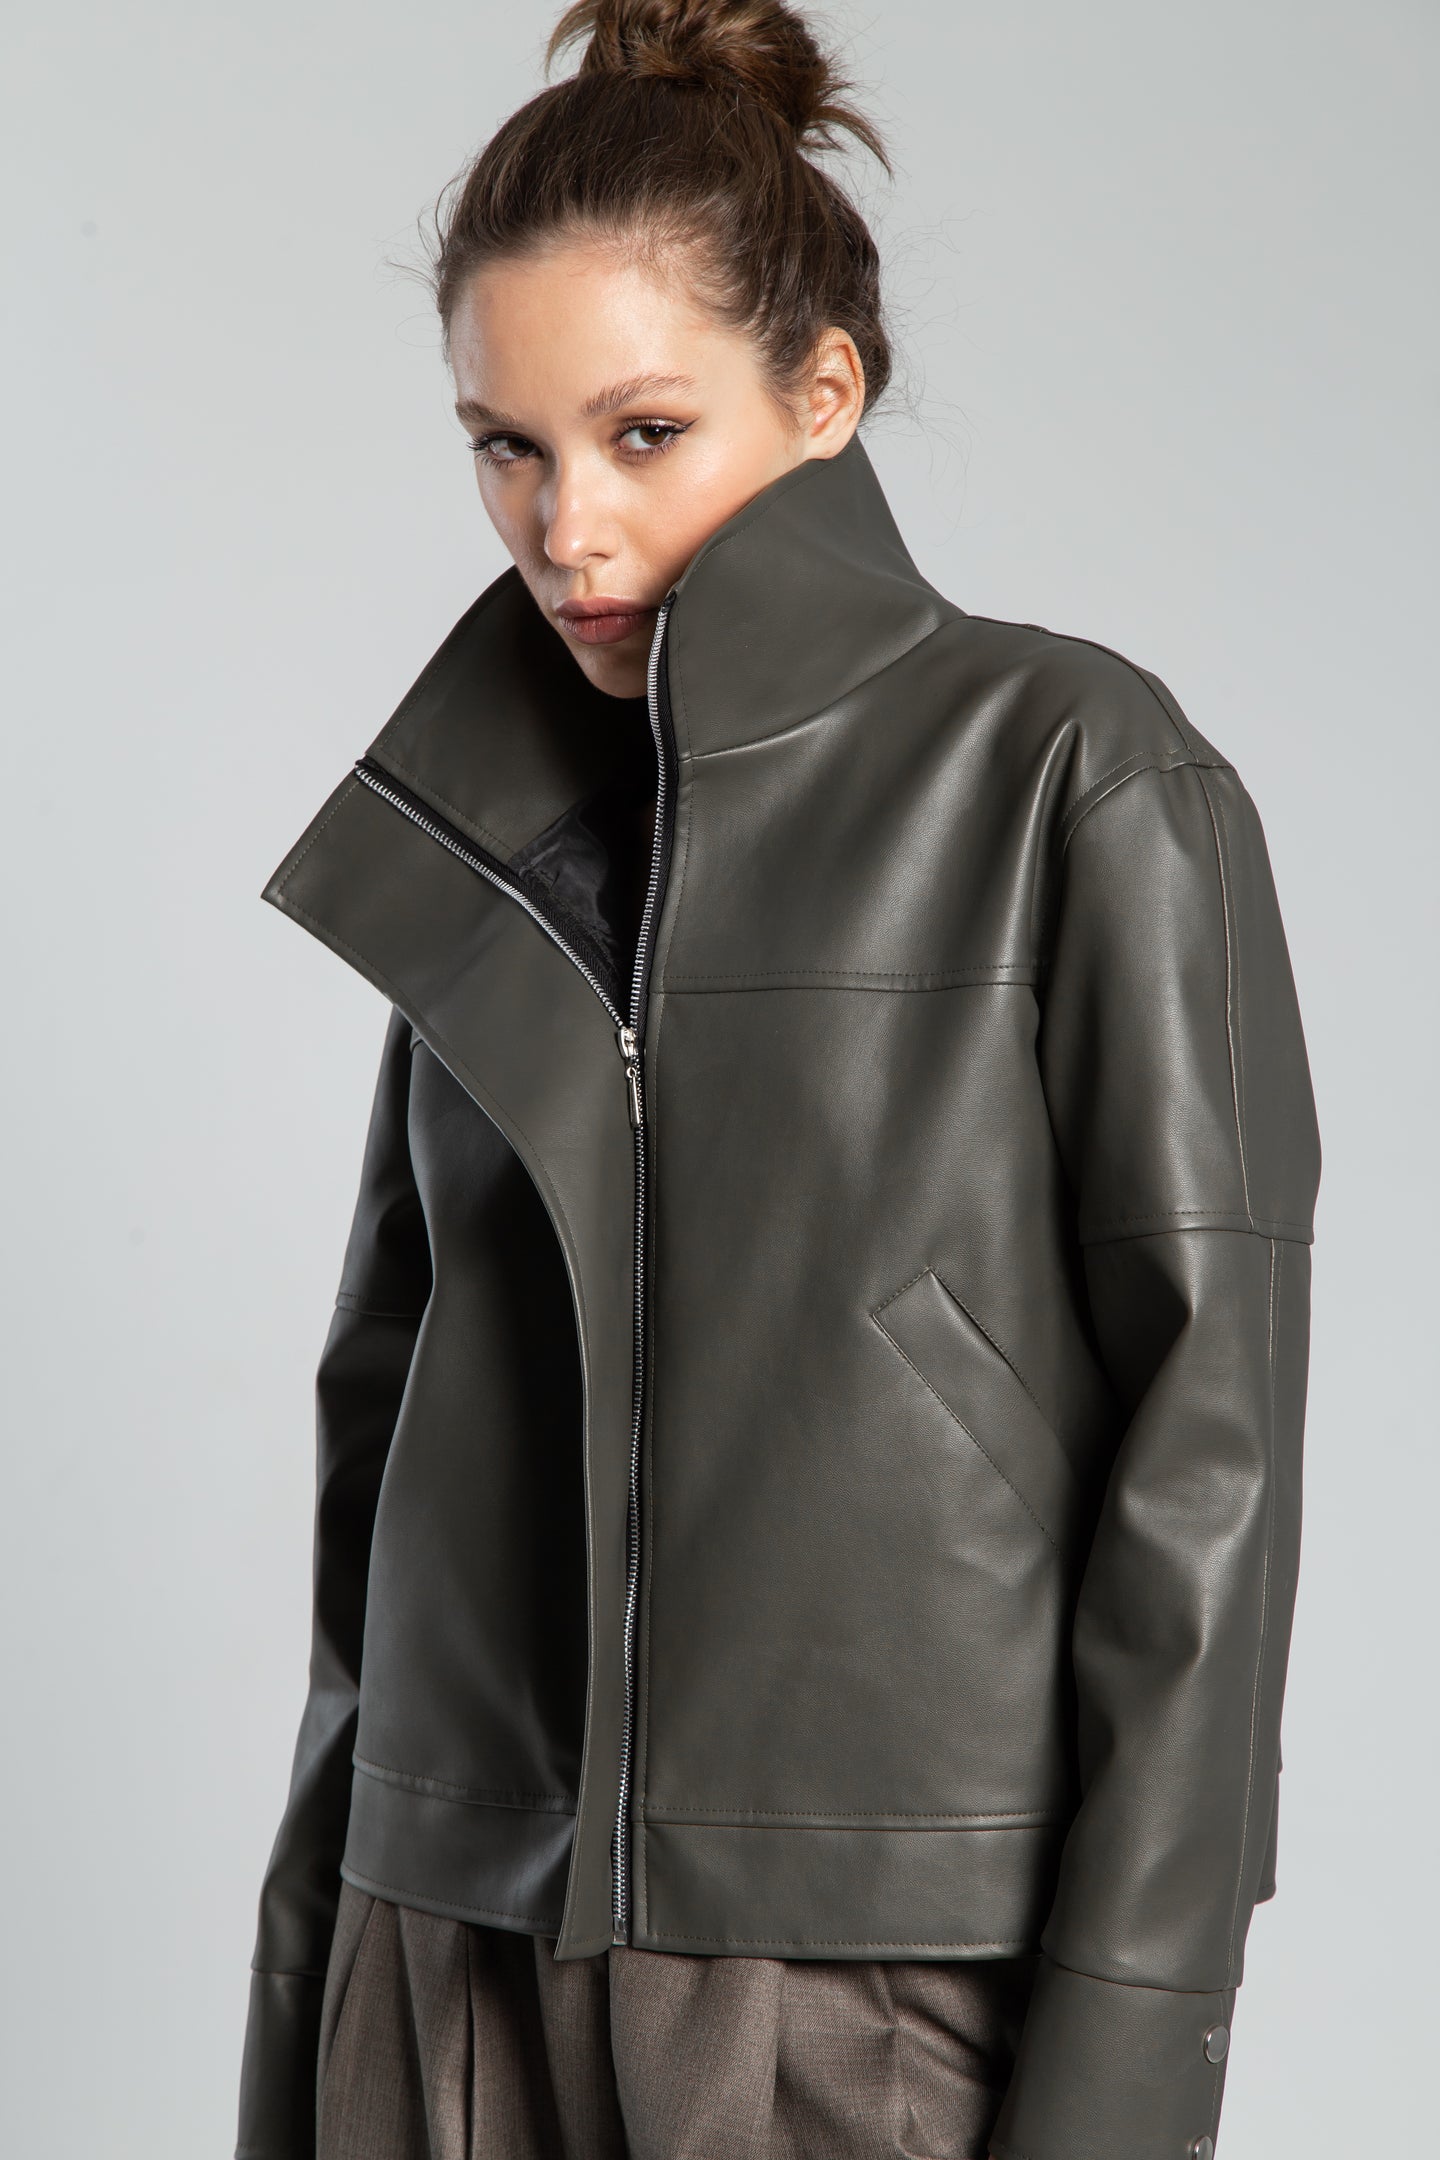 The Cumin Spice Leather Jacket